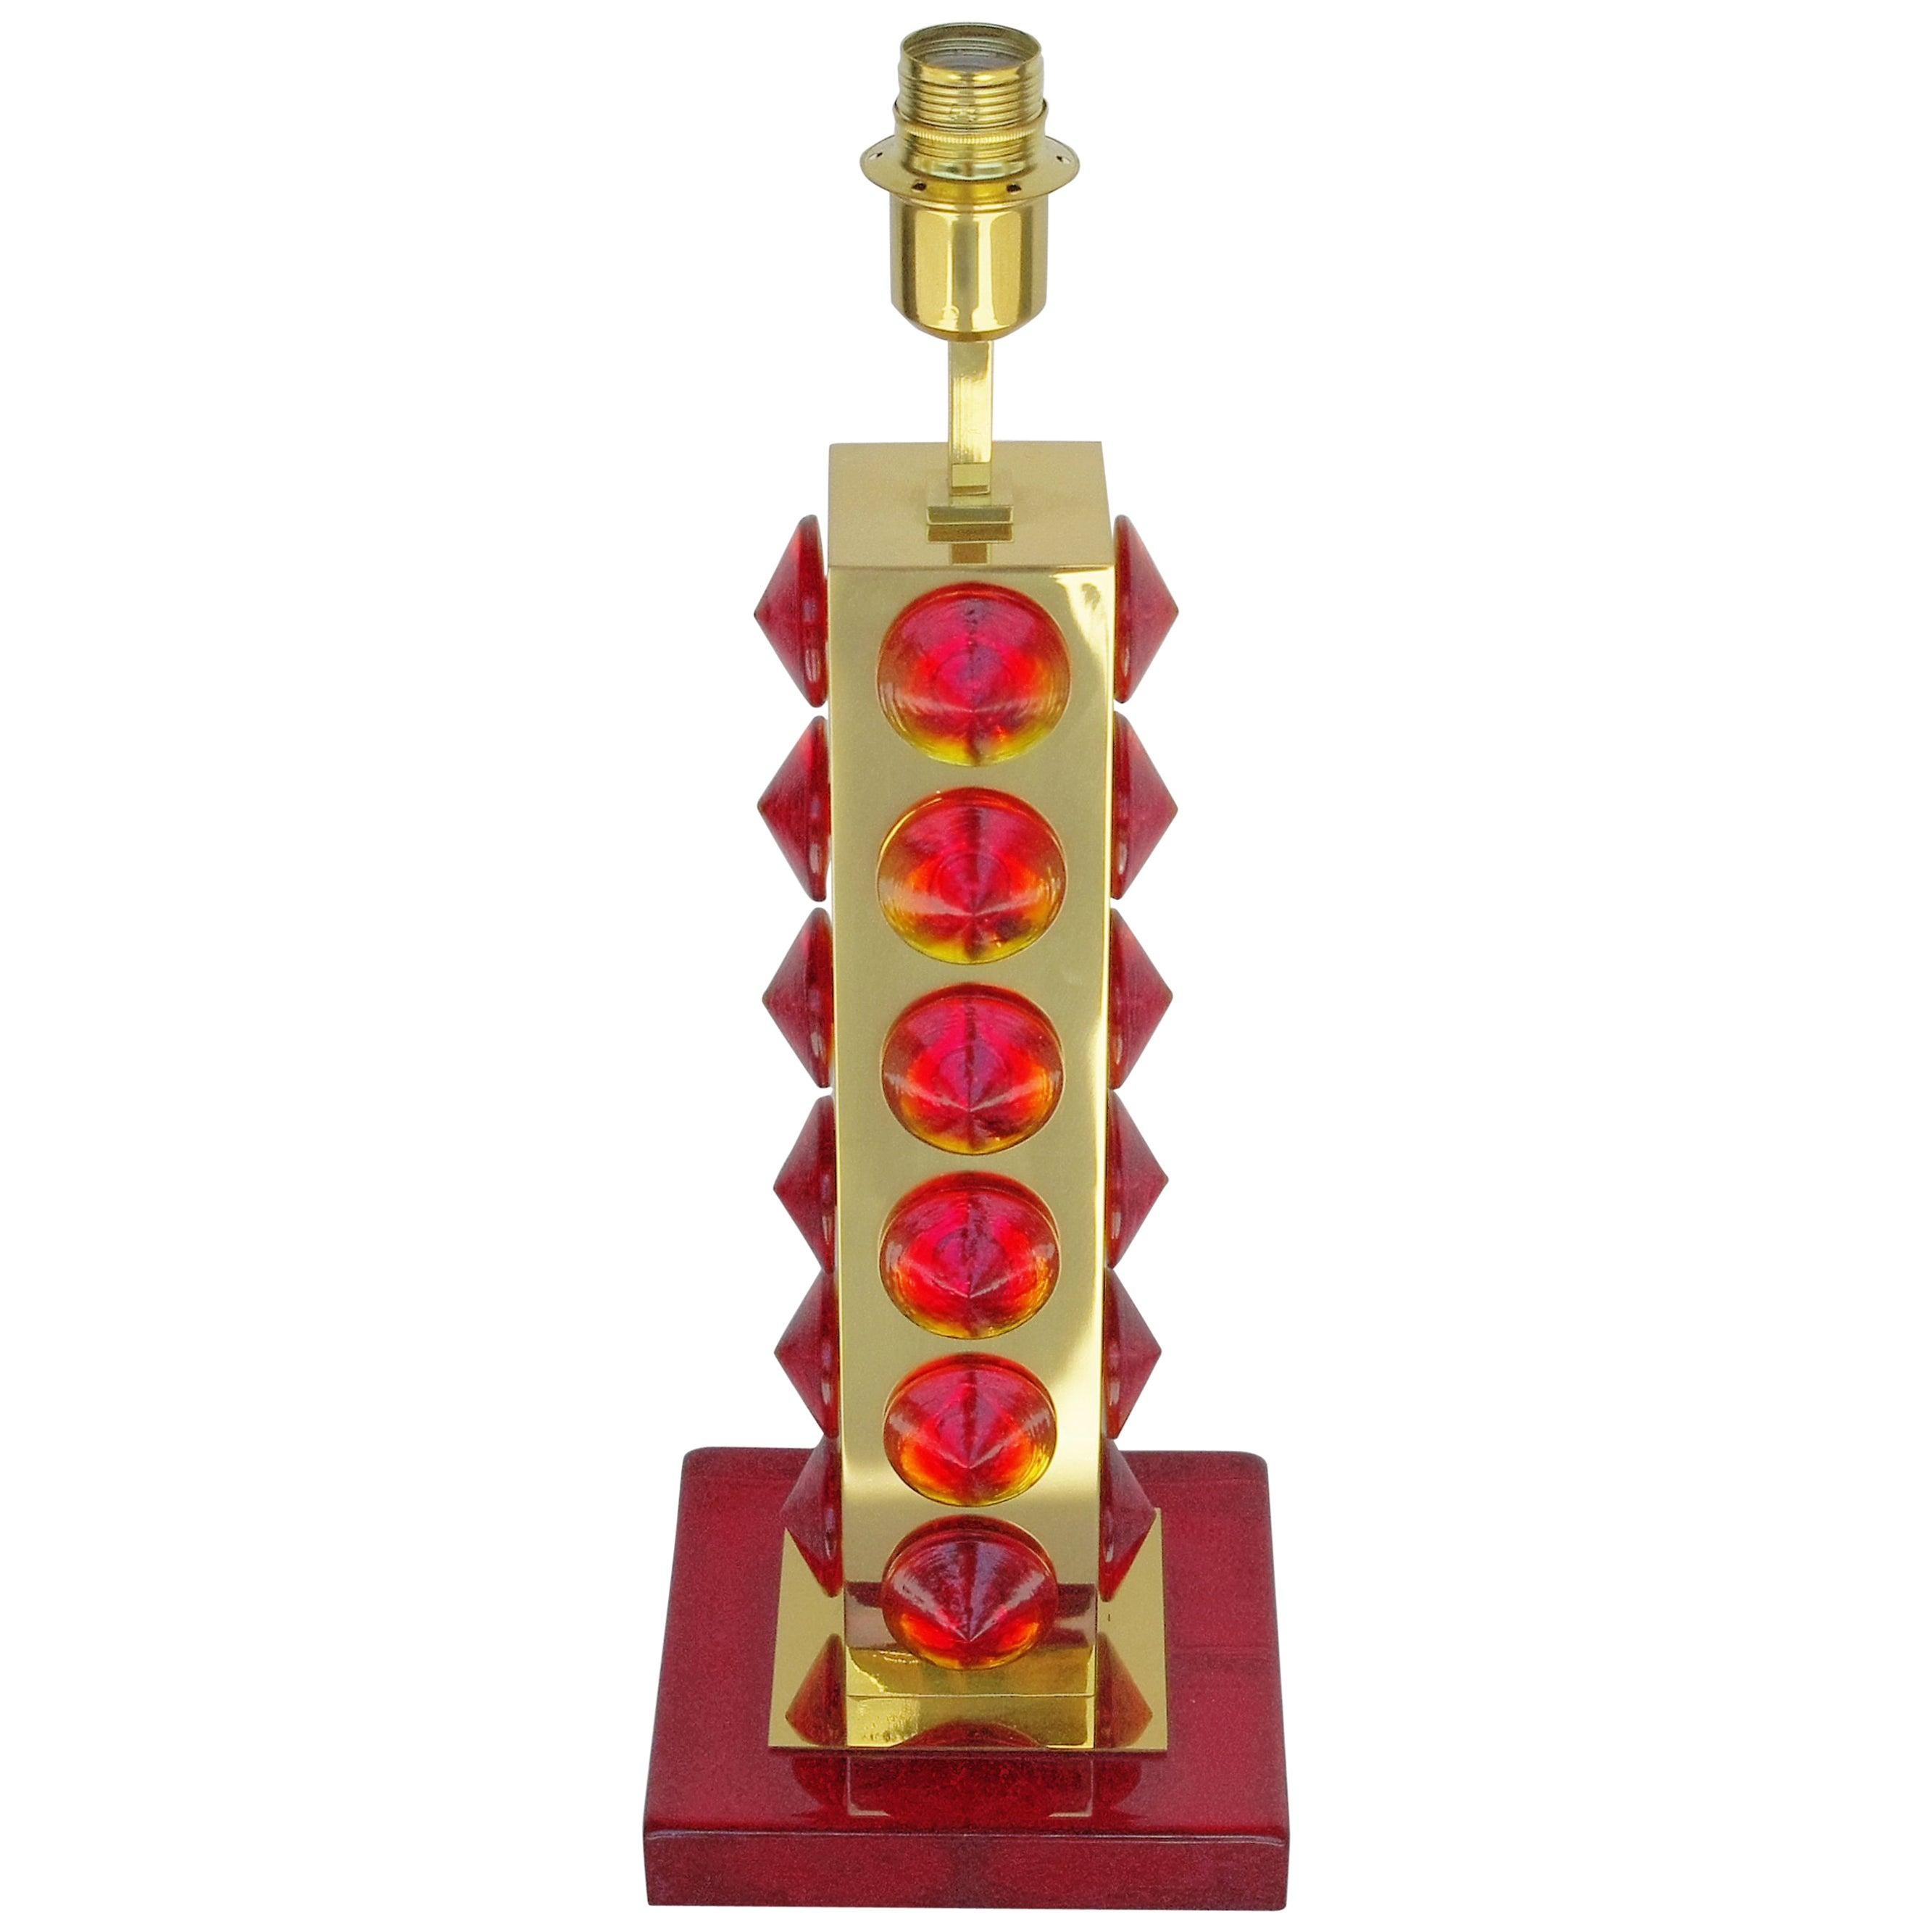 Italian table lamp with decorative red pyramid-shaped Murano glasses mounted on a polished brass frame and a red Murano glass base / Designed by Fabio Bergomi for Fabio Ltd / Made in Italy 
1 light / E26 or E27 type / max 60 W 
Measures: Height 22.5